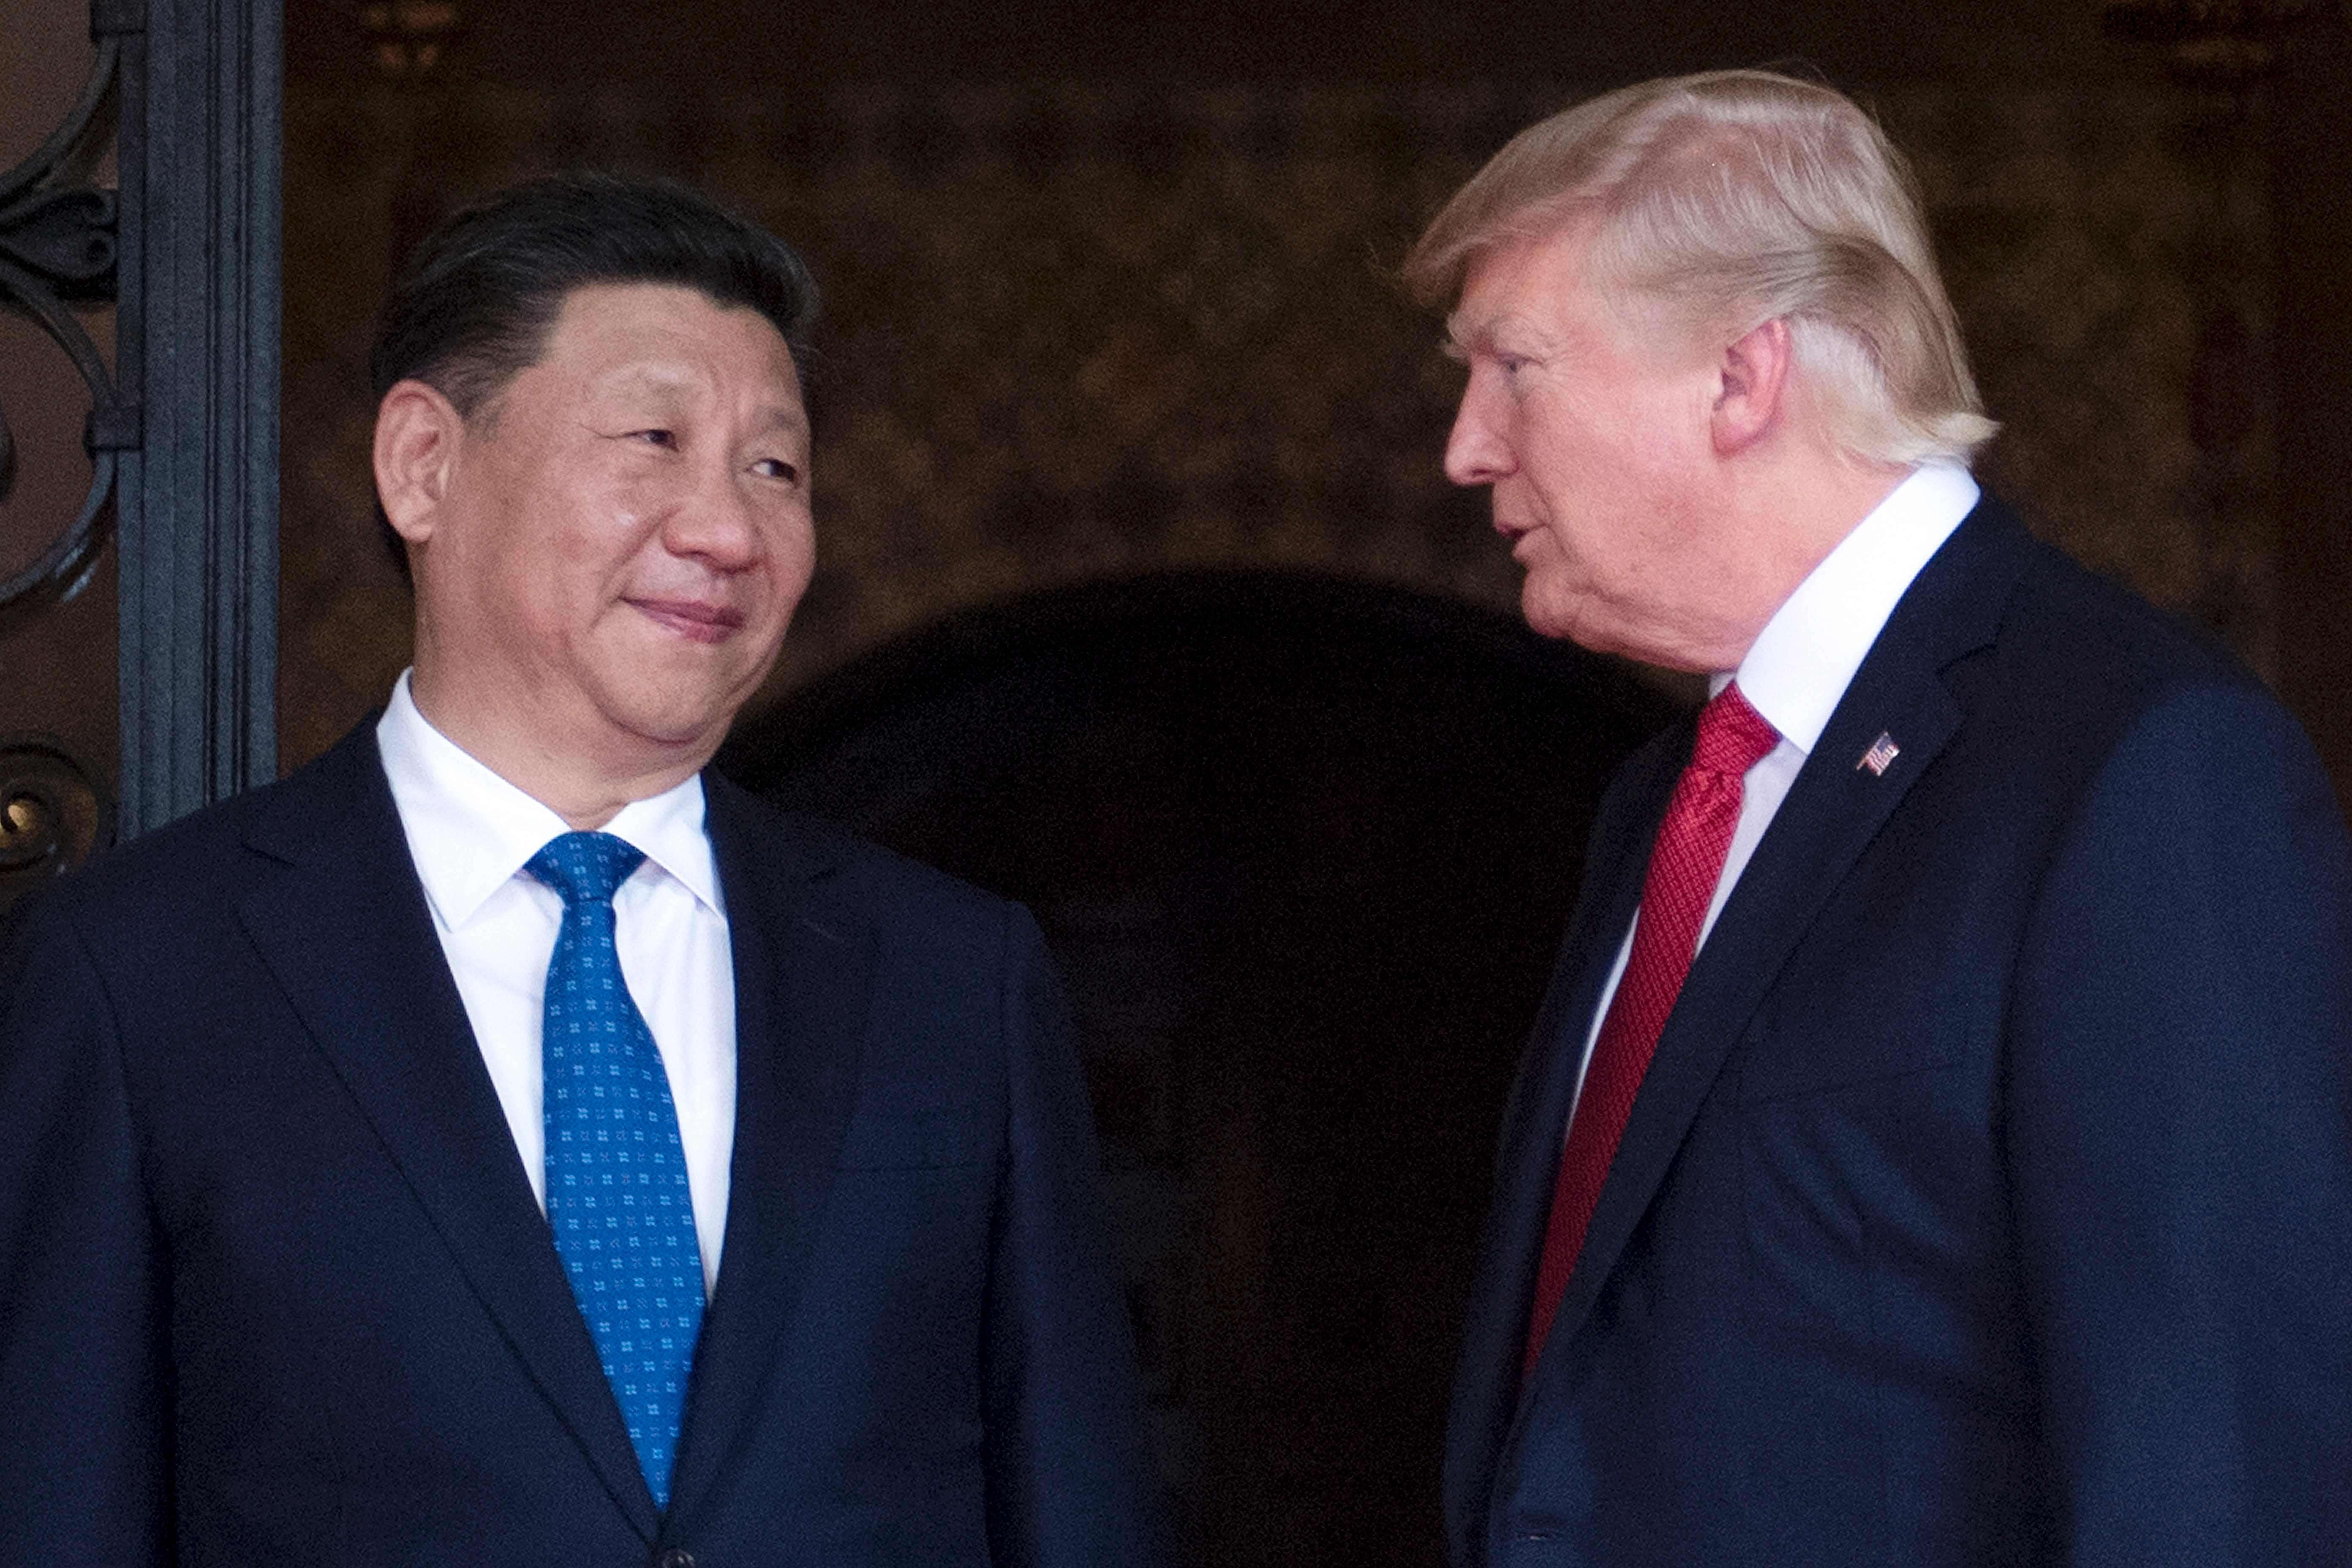 US President Donald Trump welcomes President Xi Jinping to the Mar-a-Lago estate in Florida on April 6. Photo: AFP